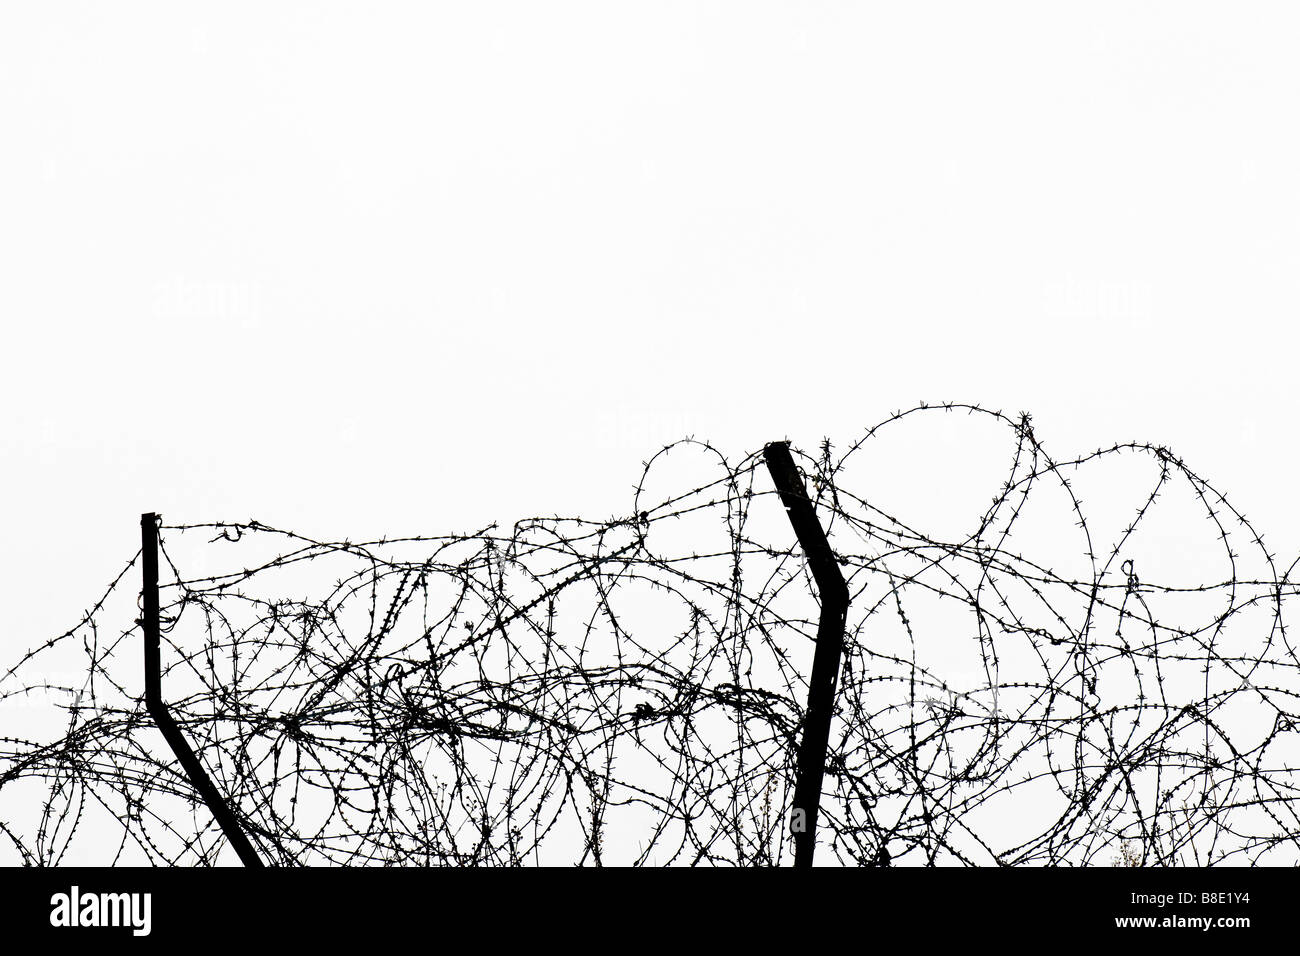 Barbed wire. Stock Photo